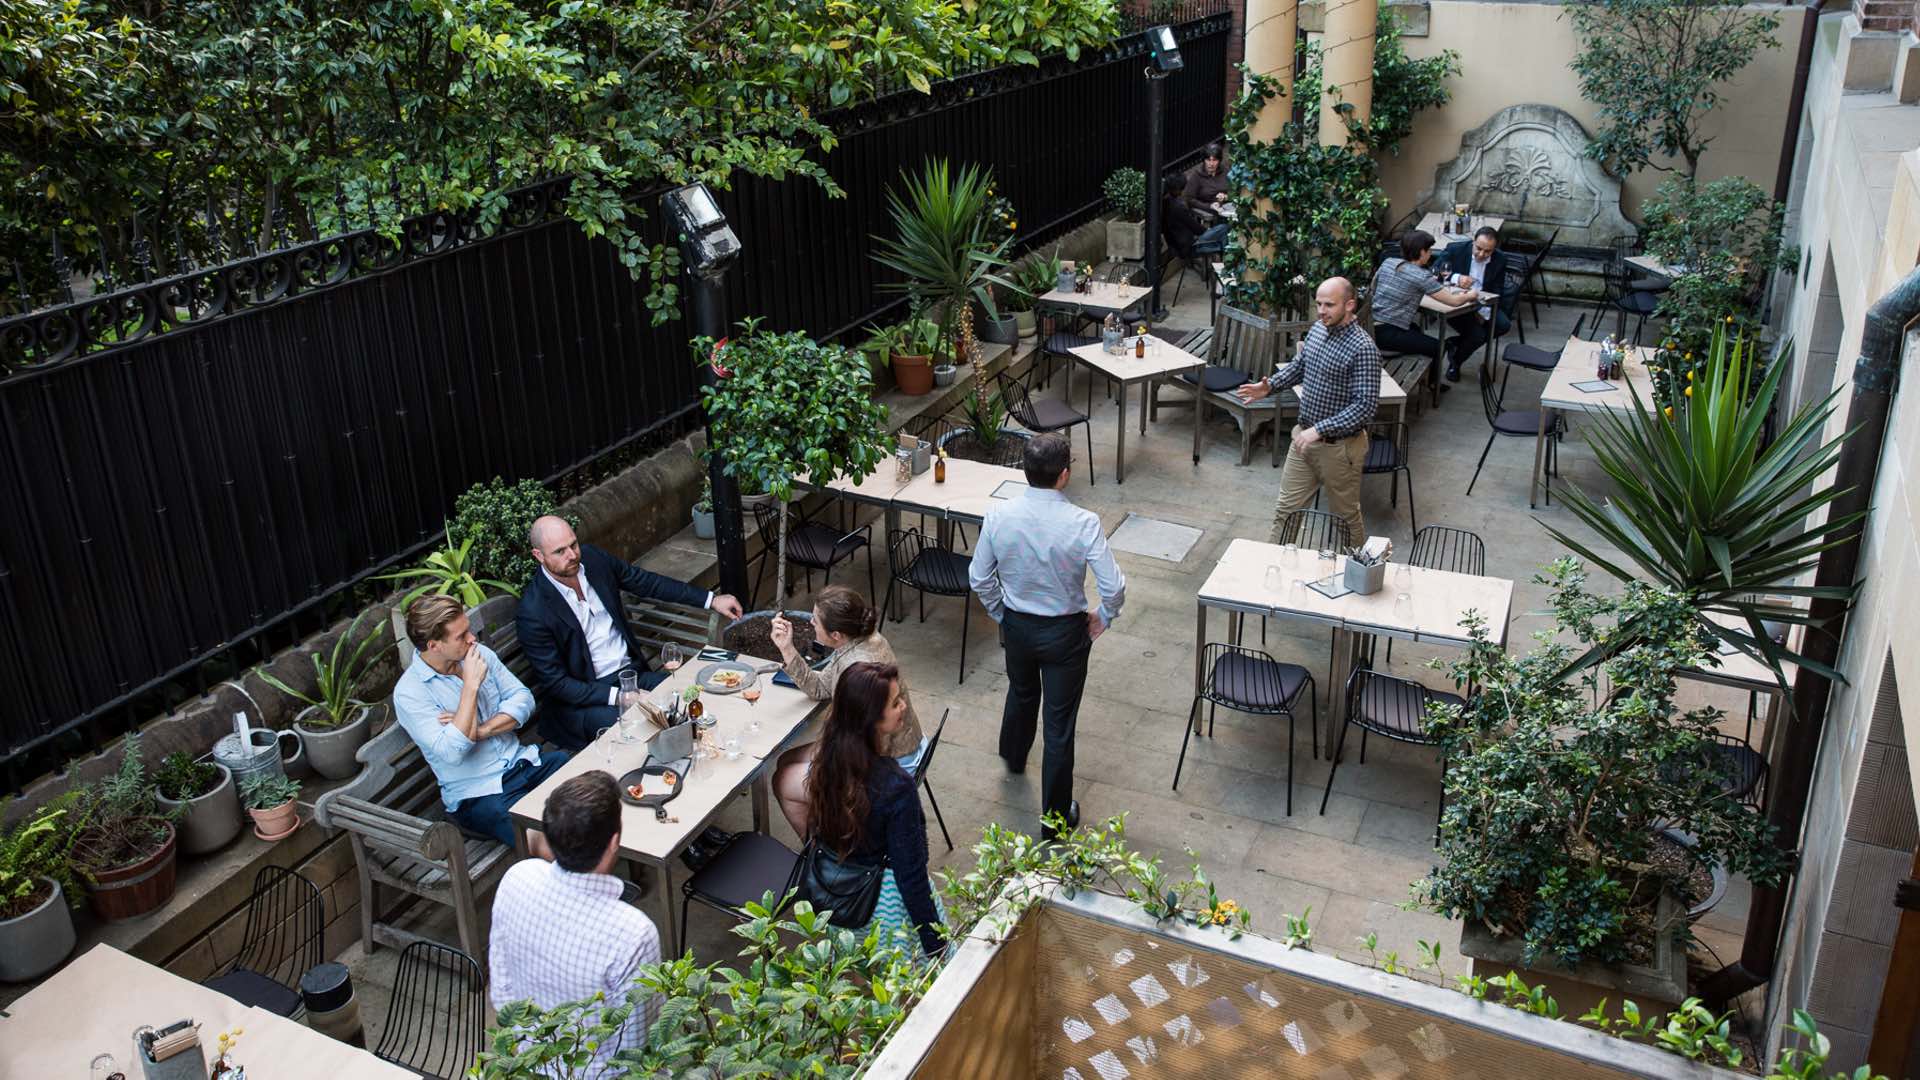 Jardin St James Introduces Extended Hours For After-Work Courtyard Aperitifs